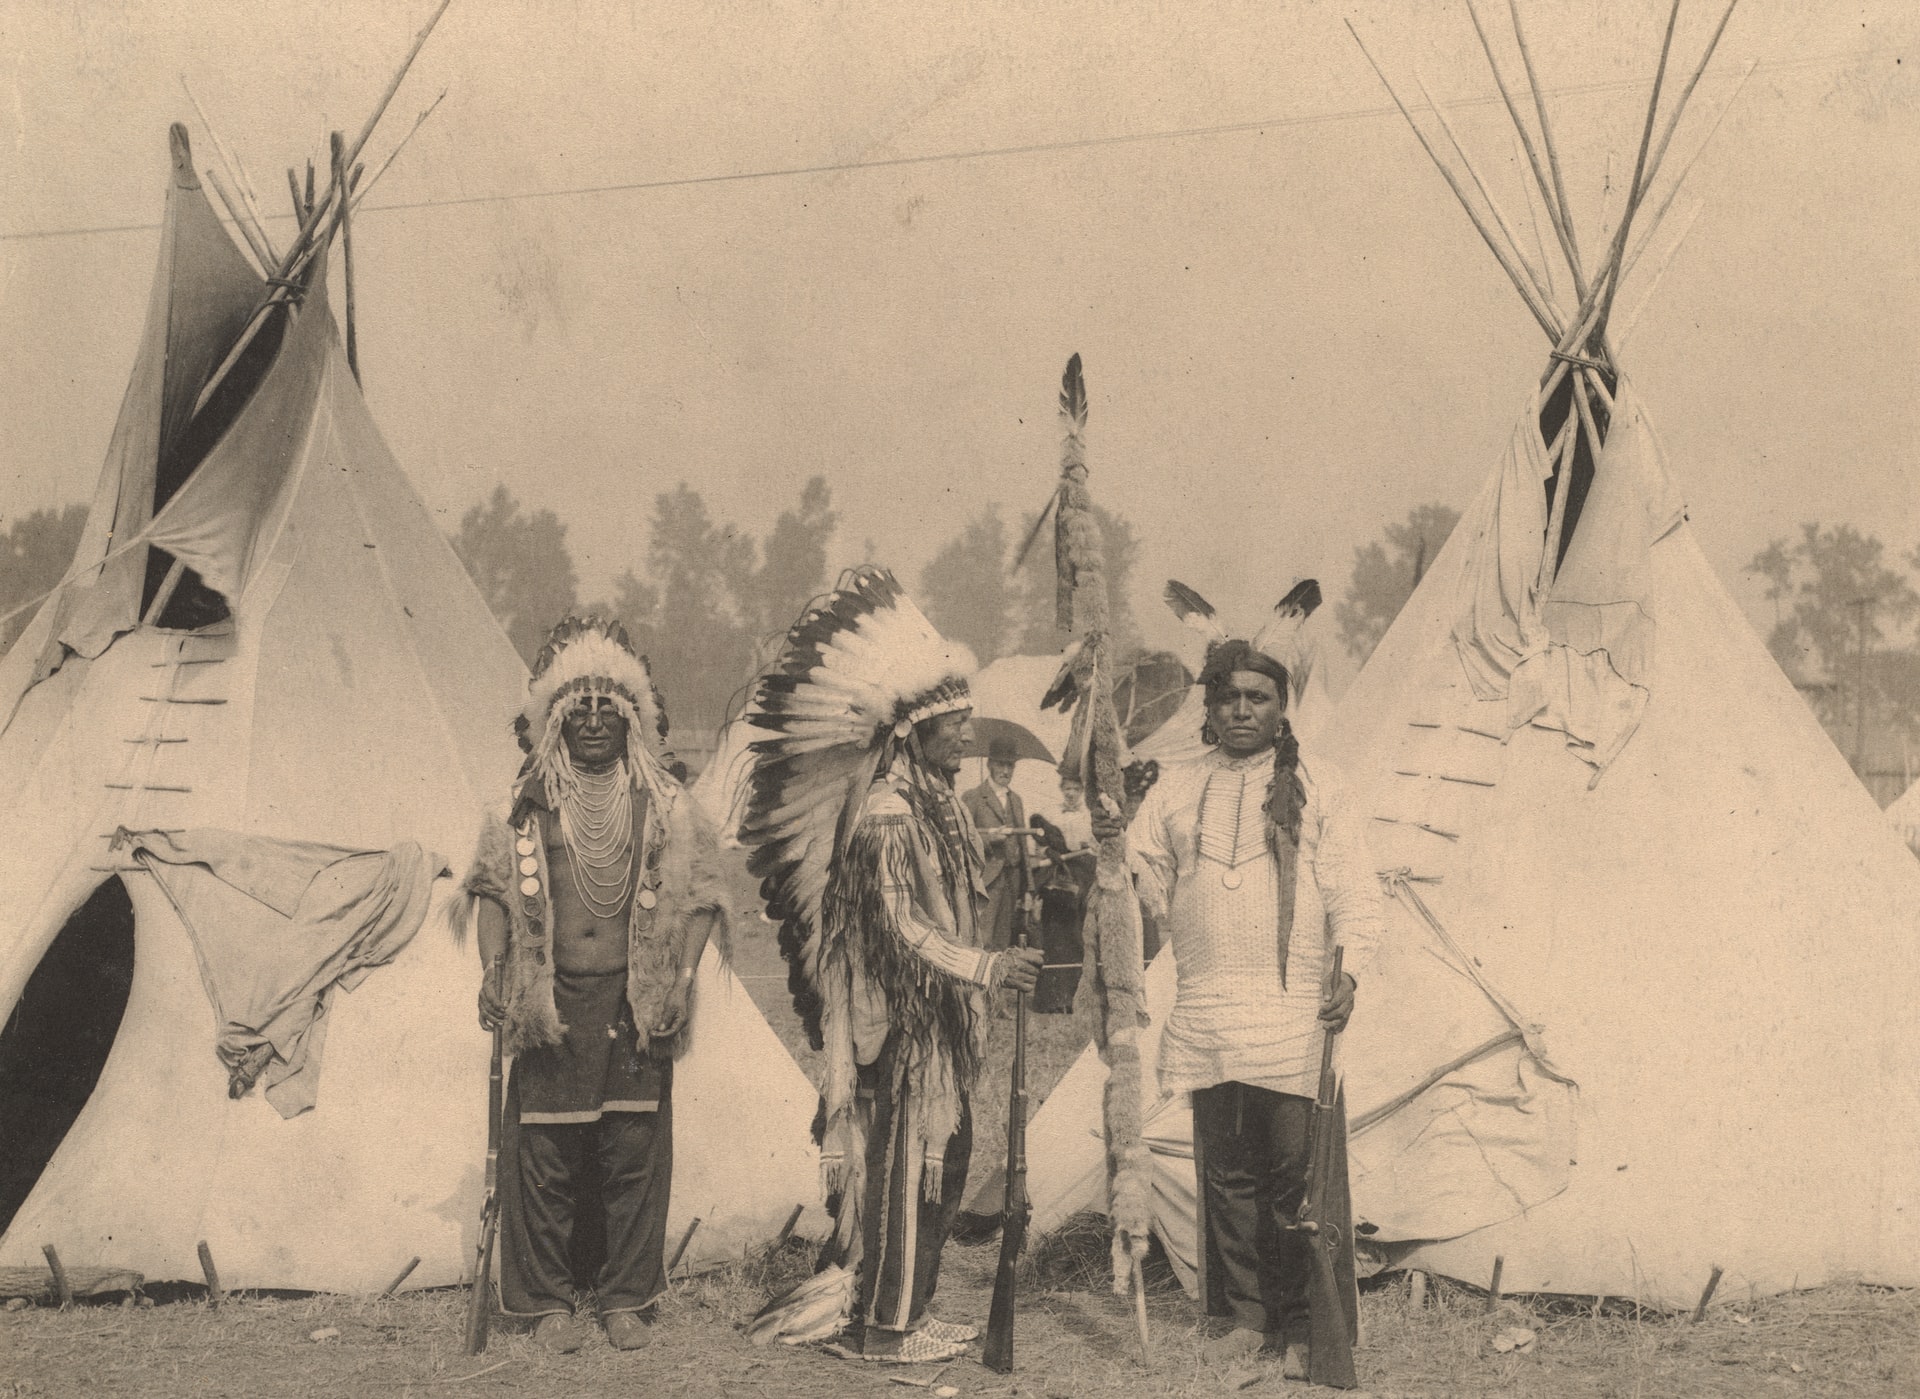 members of the Sioux American Indian tribe stand in front of tipis